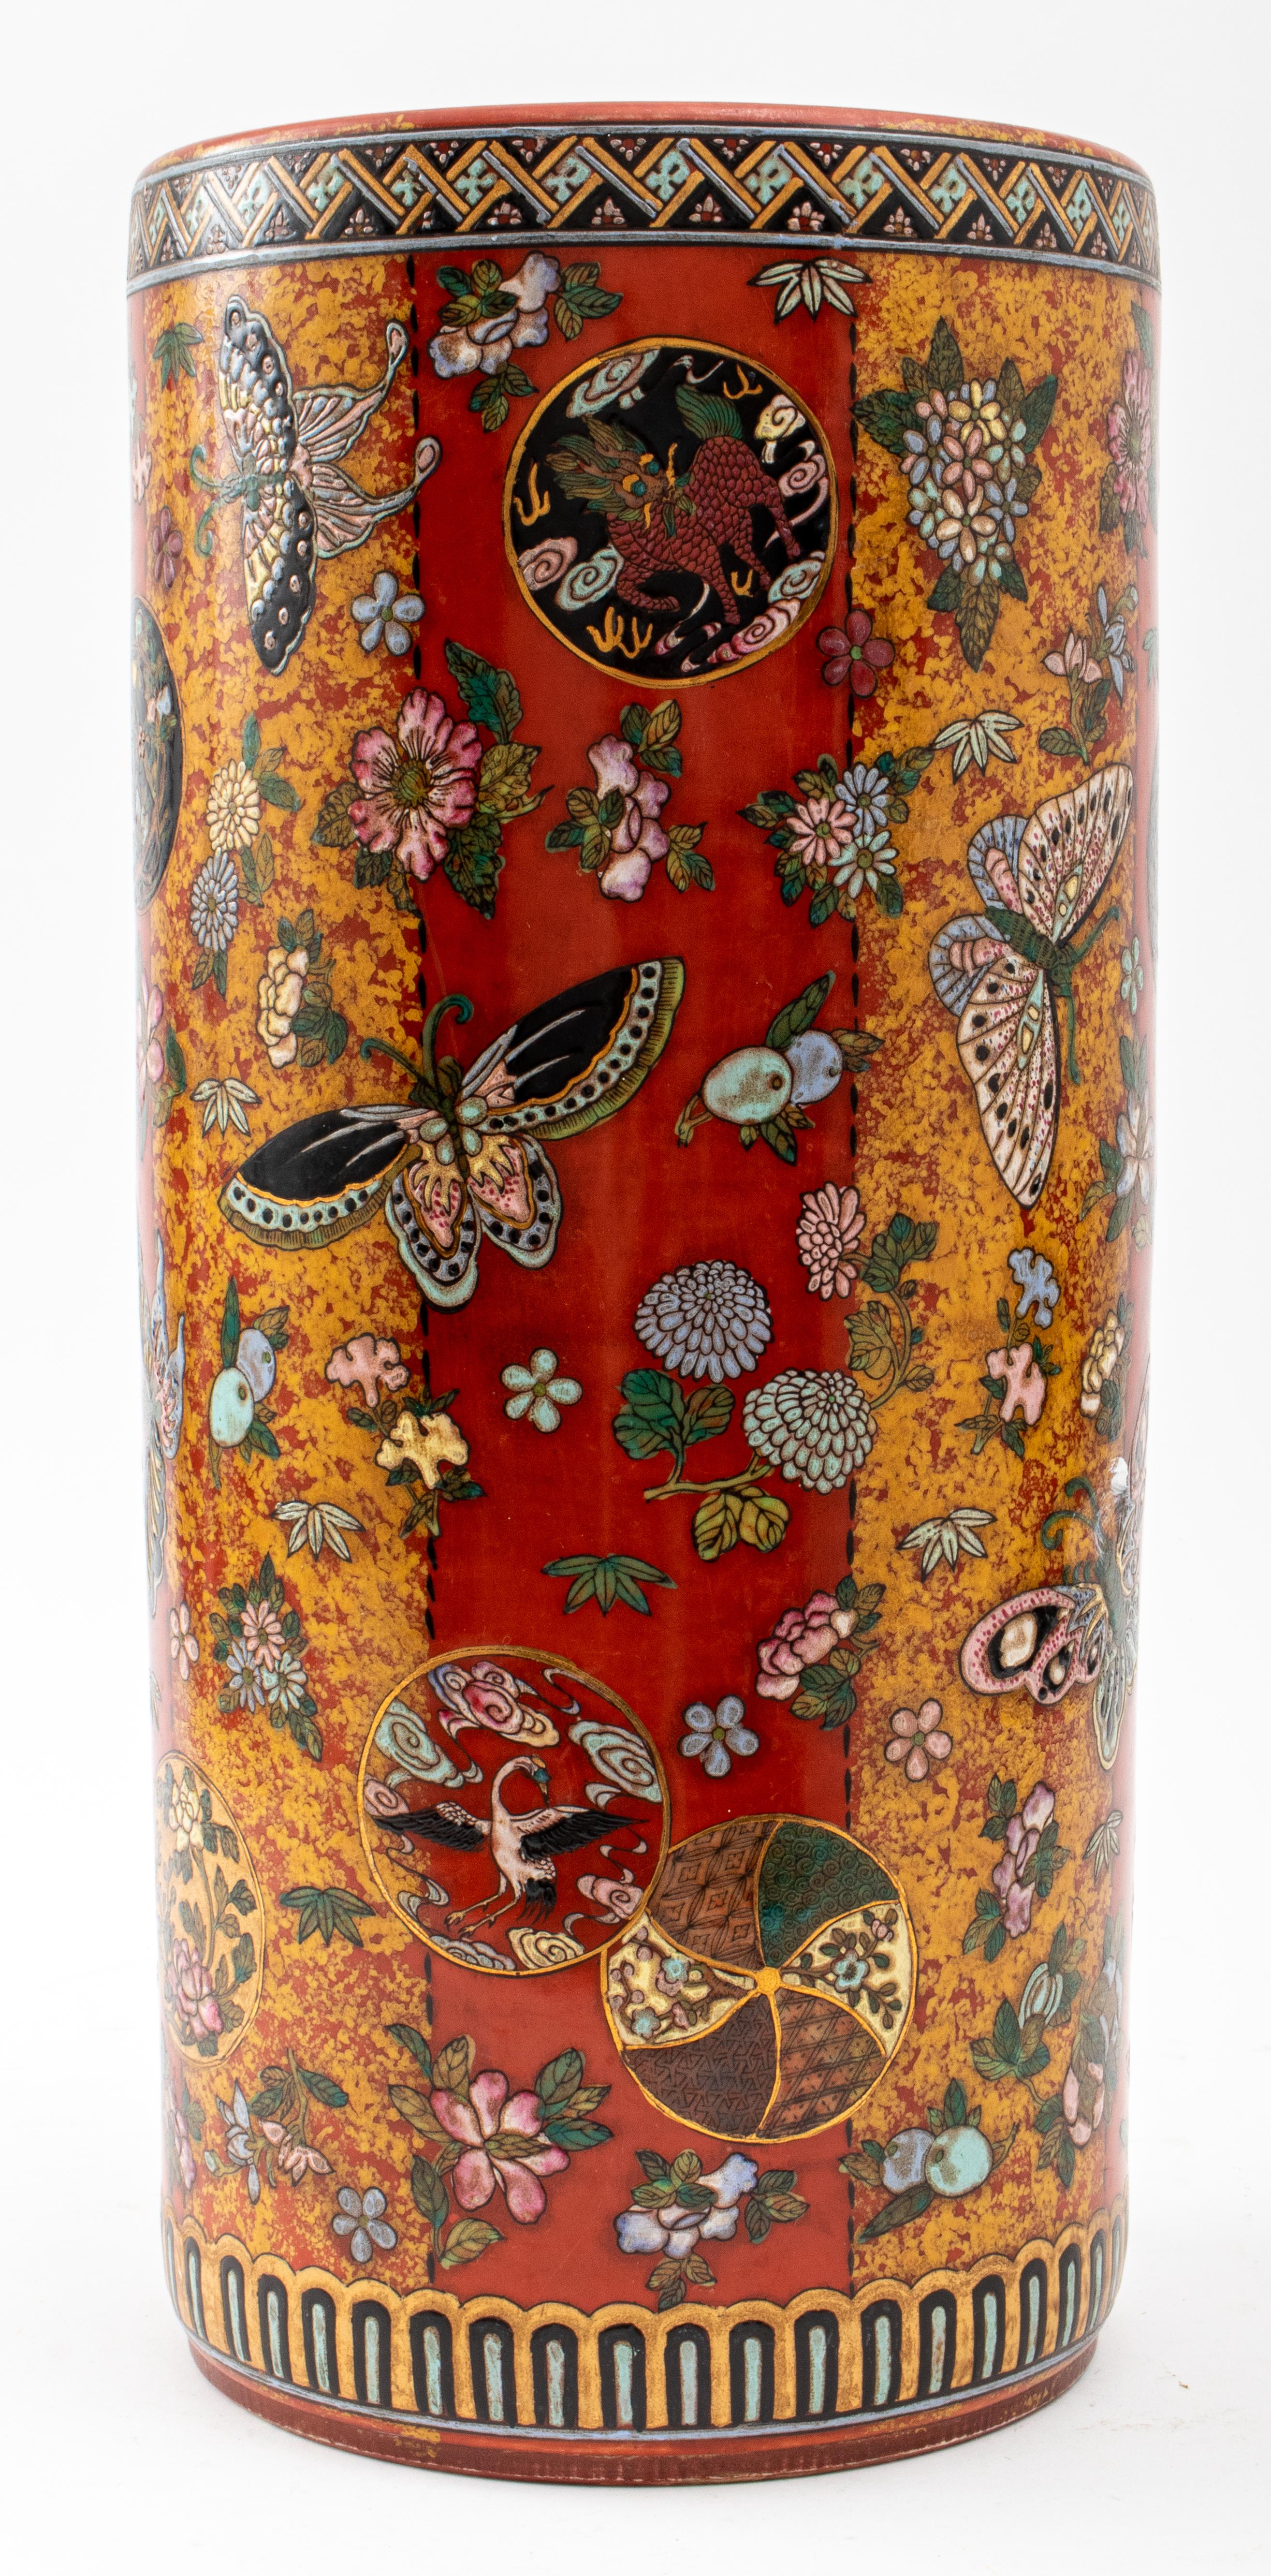 Japanese Kutani manner umbrella stand, depicting polychrome butterflies, flowers, fruits, and decorative roundels against a red ground with geometric banded decoration. 
Measures: 18.5